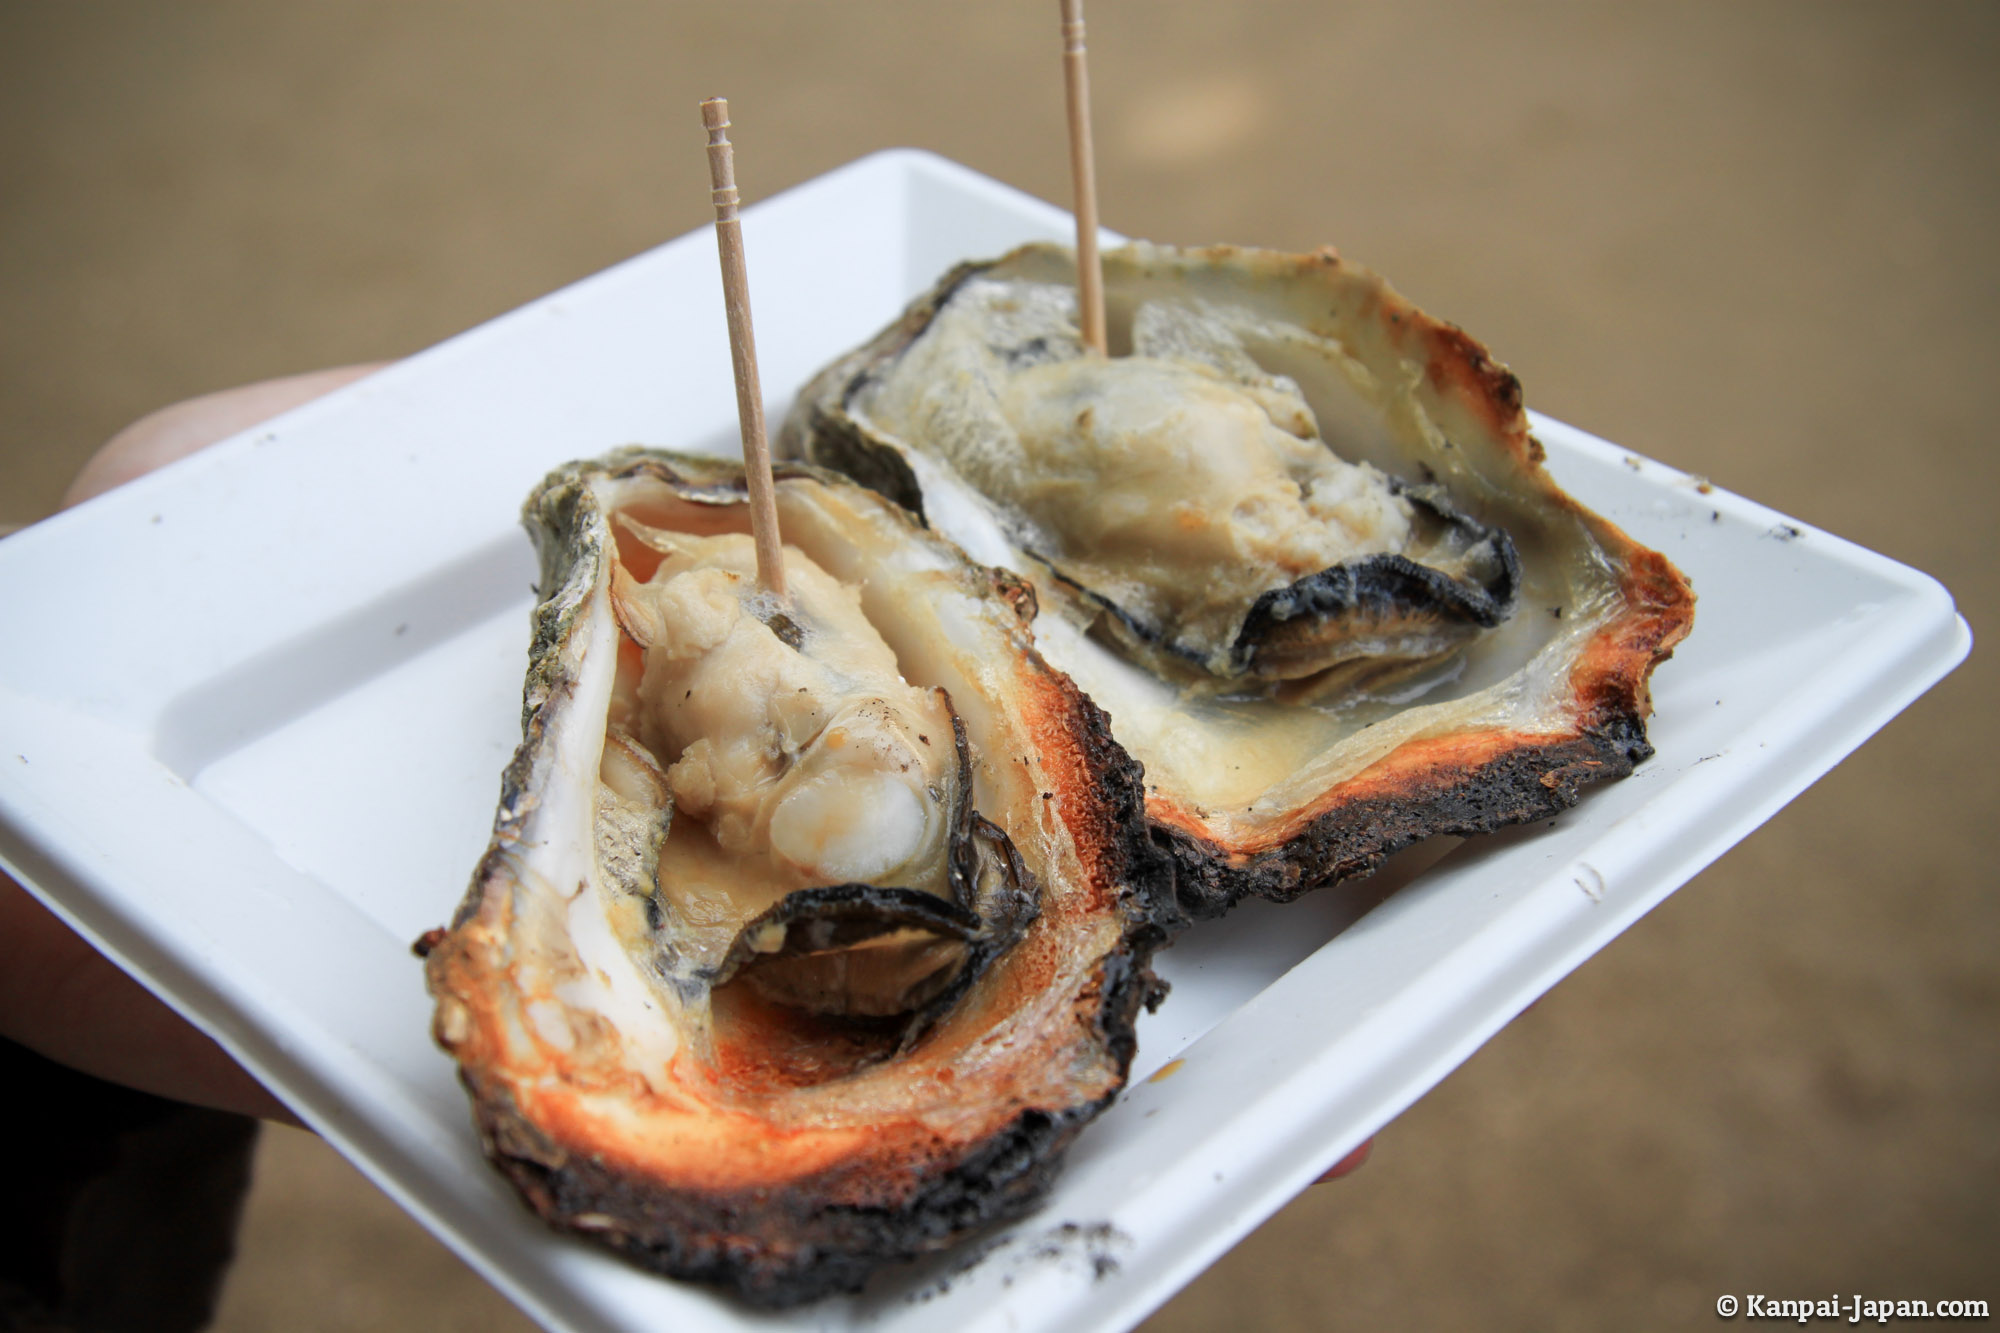 Miyajima's Cooked Oysters - The Must-eat Seafood in Hiroshima Area